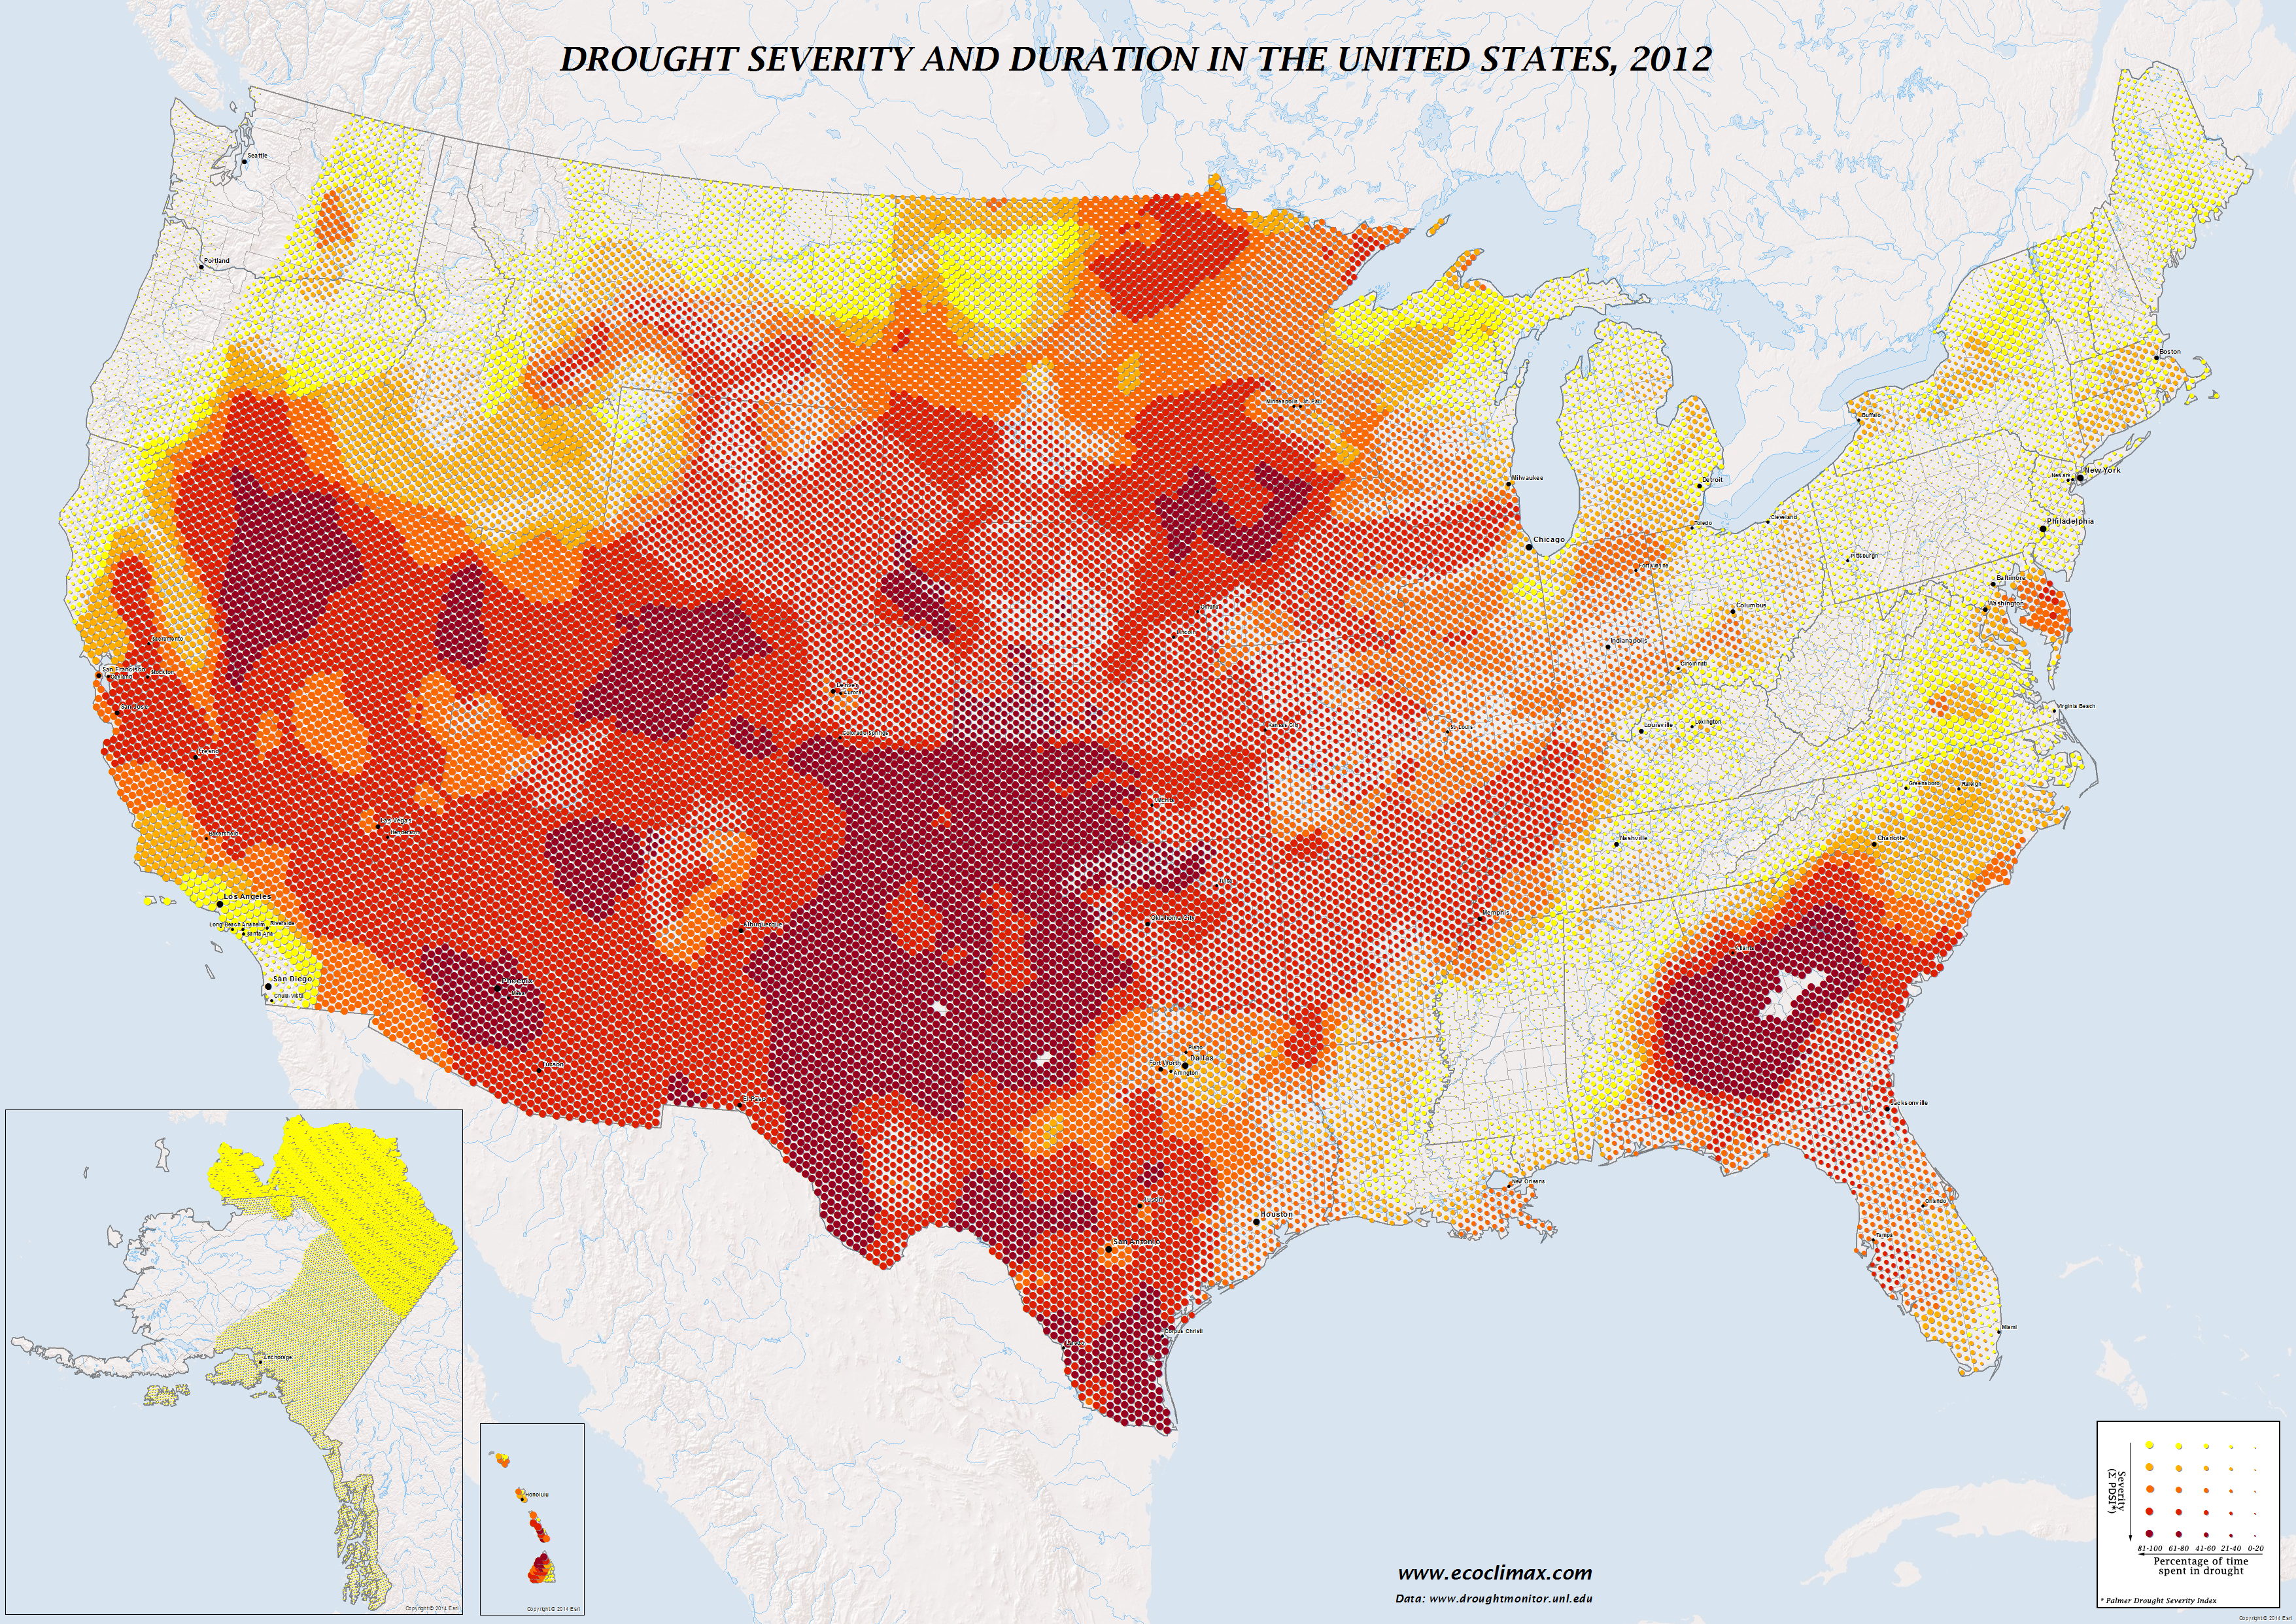 Drought severity & duration in the U.S, 2012